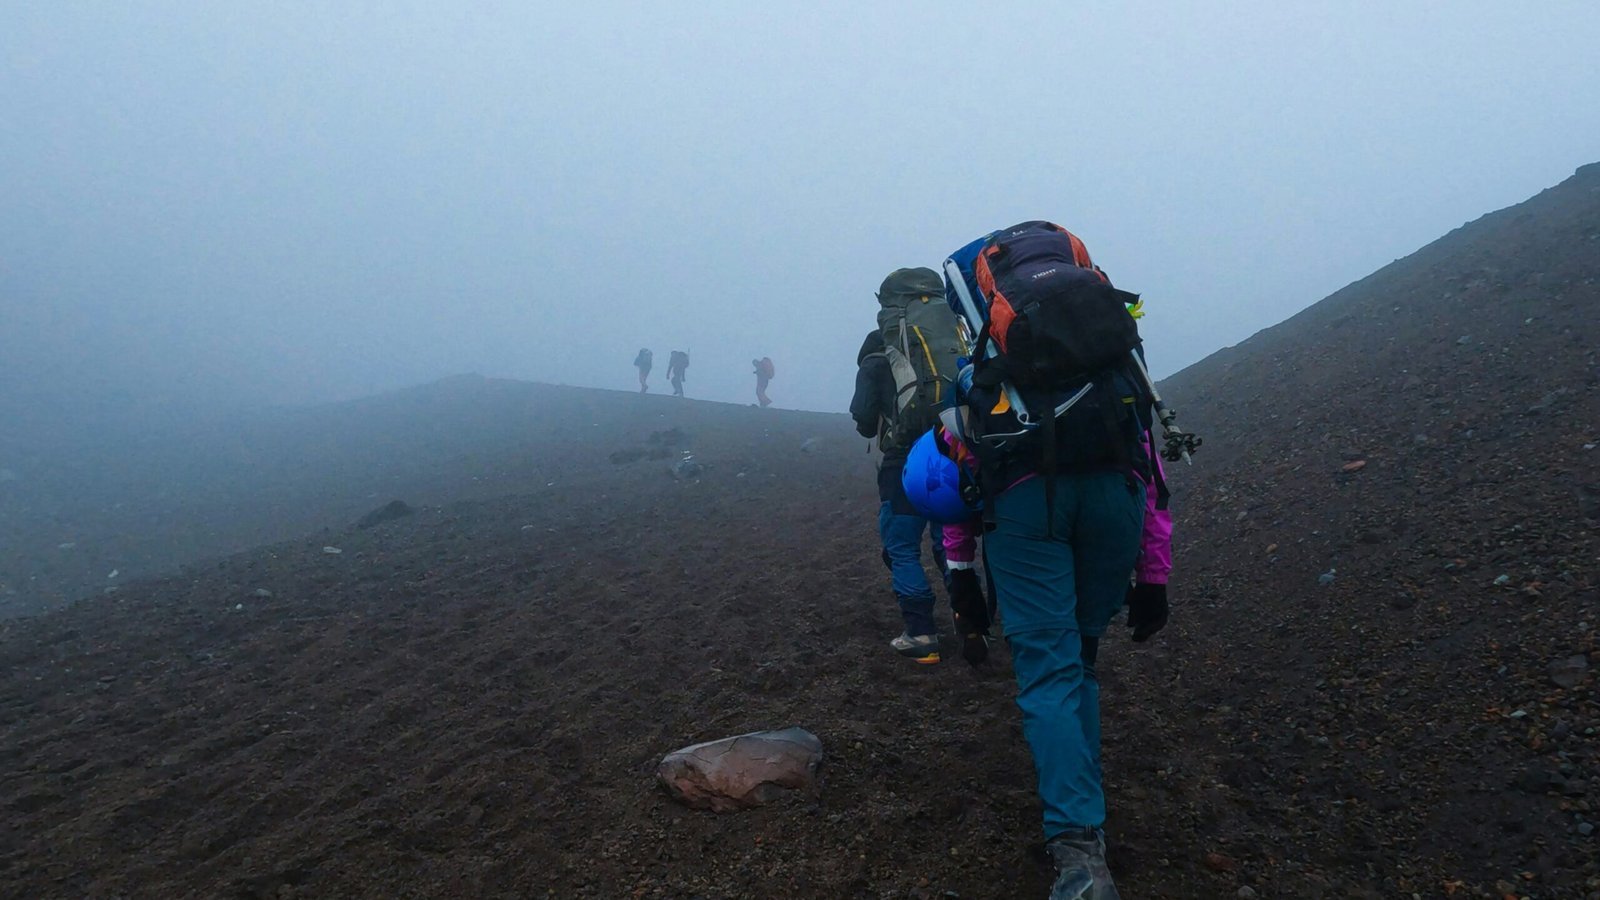 a group of people hiking up a hill on a foggy day